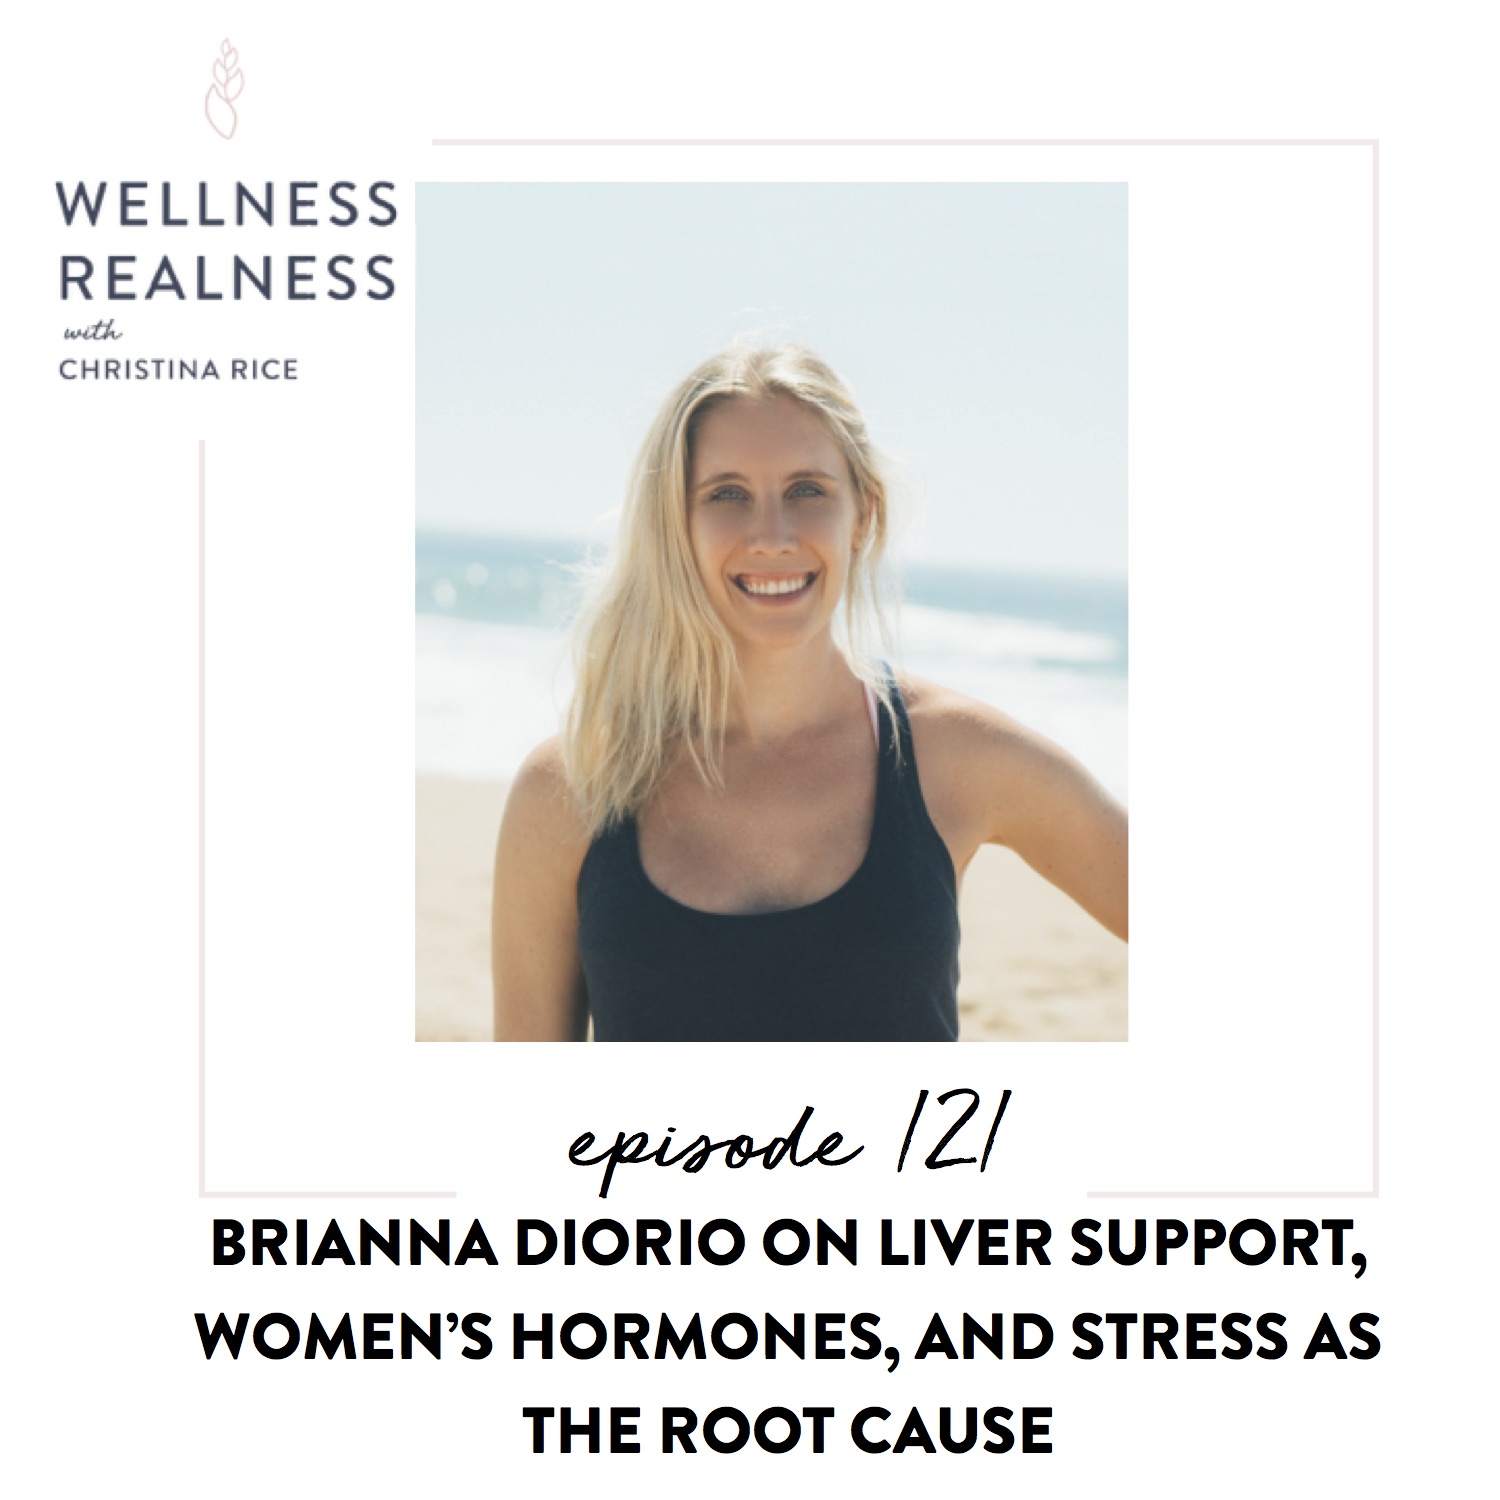 121: Brianna Diorio on Liver Support, Women’s Hormones, and Stress as the Root Cause